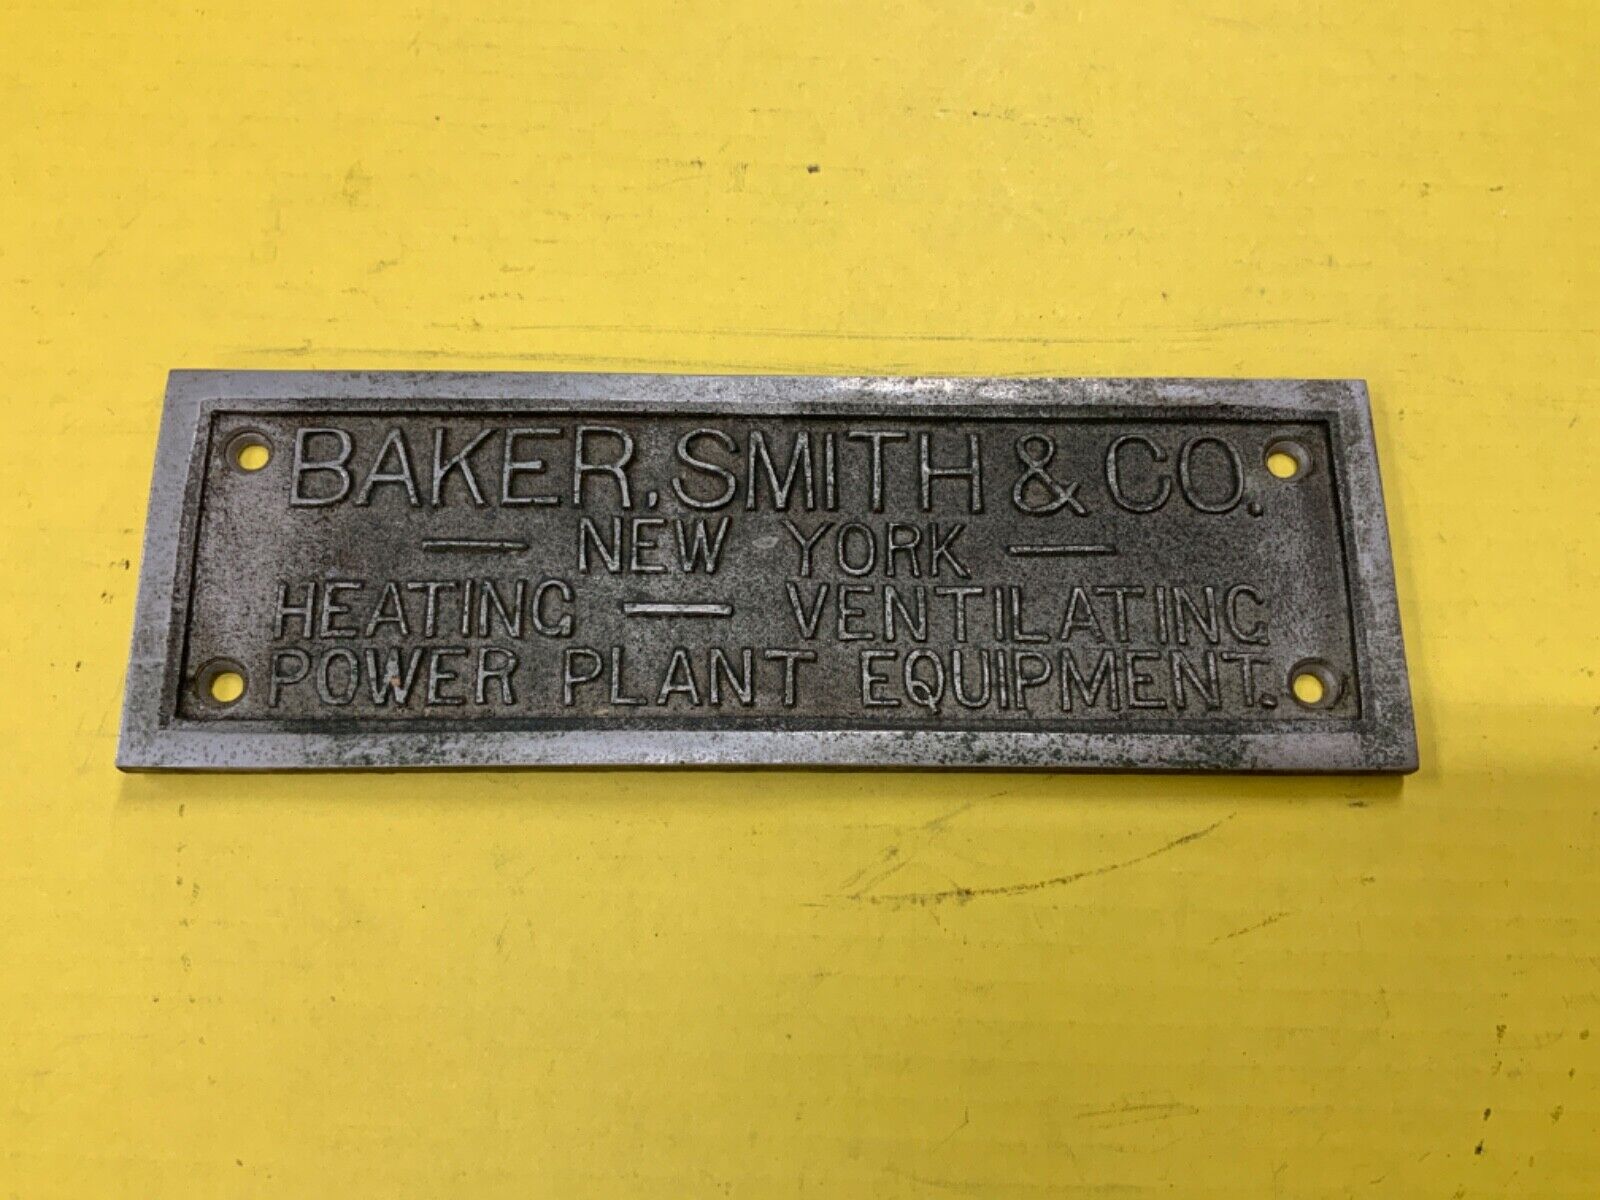 Baker Smith & Co. NY Power Plant Equipment Pressed Metal NamePlate